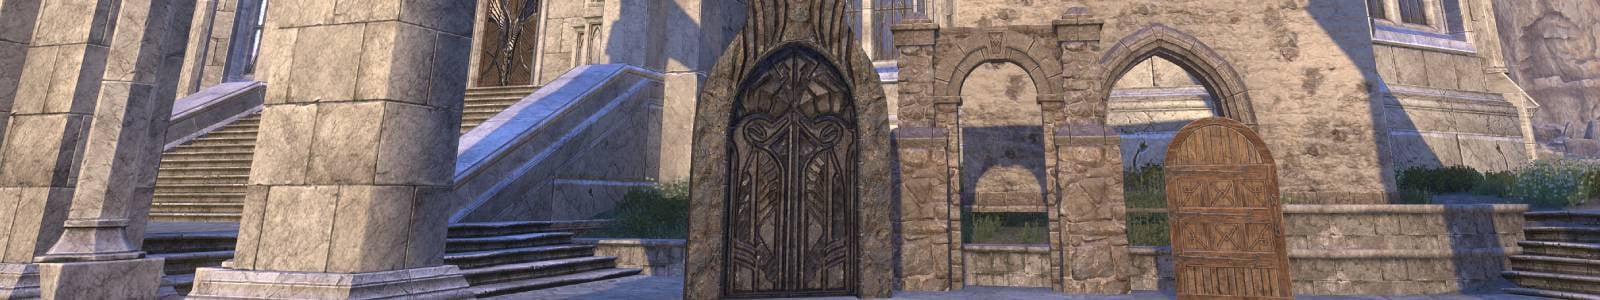 Gate, Spiked Iron - ESO header